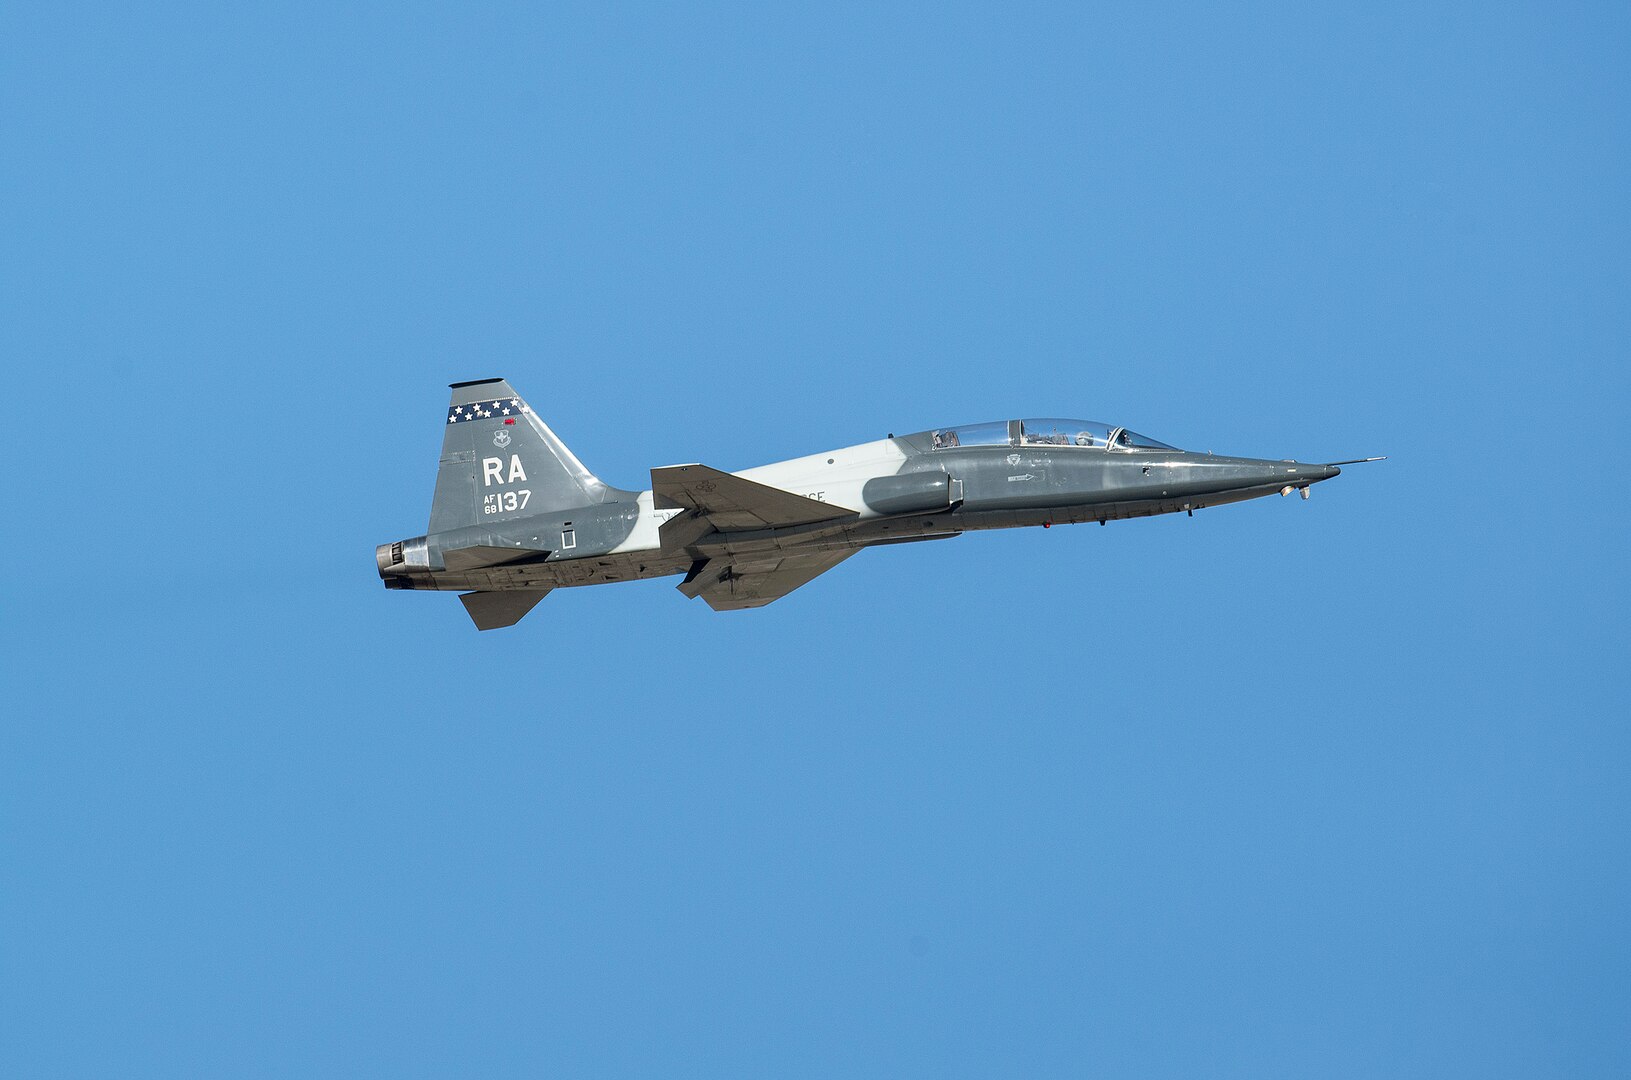 A formation of T-38C Talons flies over Joint Base San Antonio-Randolph Seguin Auxiliary Airfield during a ribbon cutting event signifying the reopening of the JBSA-Randolph Seguin Auxiliary Airfield Jan. 20.  Upon completion of a three-year construction project, the airfield is now ready for flying by members of the 560th Flying Training Squadron.  The airfield is crucial for “touch and go” training that qualifies fighter and bomber pilots as instructor pilots in the T-38C Talon.  The reconstructed runway increases flight safety by distributing training around the San Antonio area, which means fewer aircraft and less congestion around Joint Base San Antonio-Randolph. (U.S. Air Force photo by Johnny Saldivar)